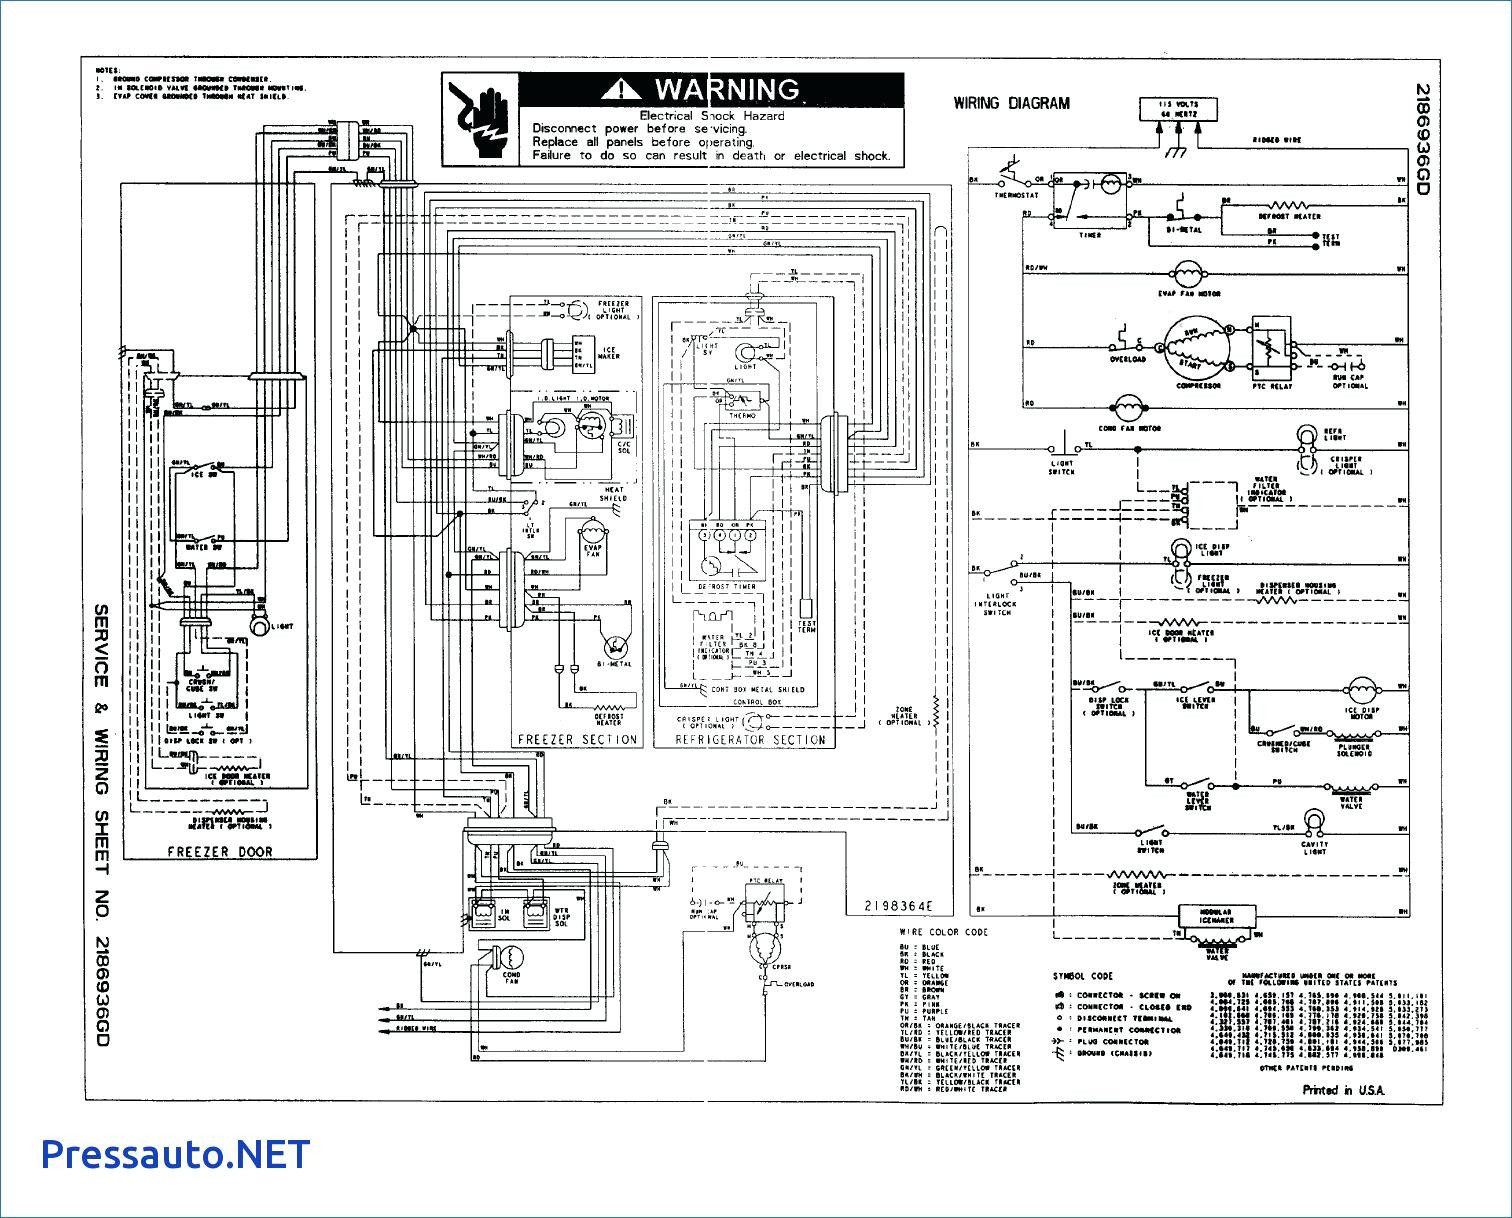 Full Size of Dometic Rv Refrigerator Wiring Diagram Schematic Refrirator Profile For Full Size Remarkable